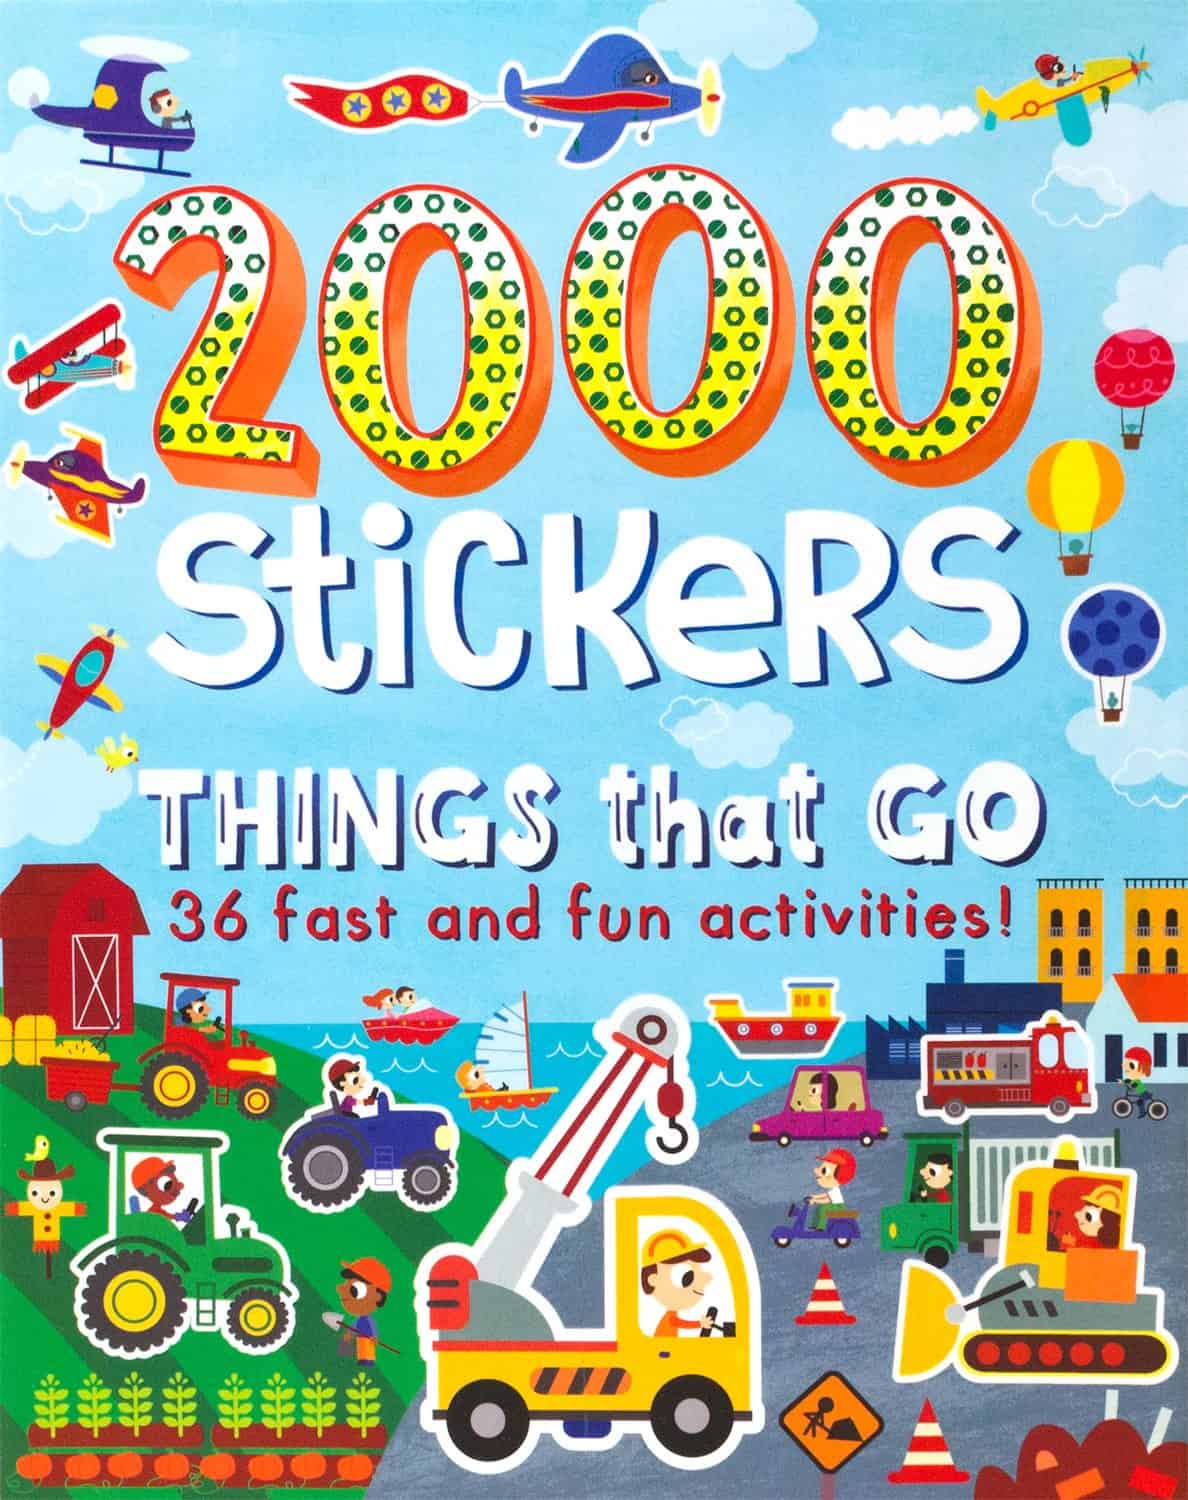 2000 Stickers Things That Go